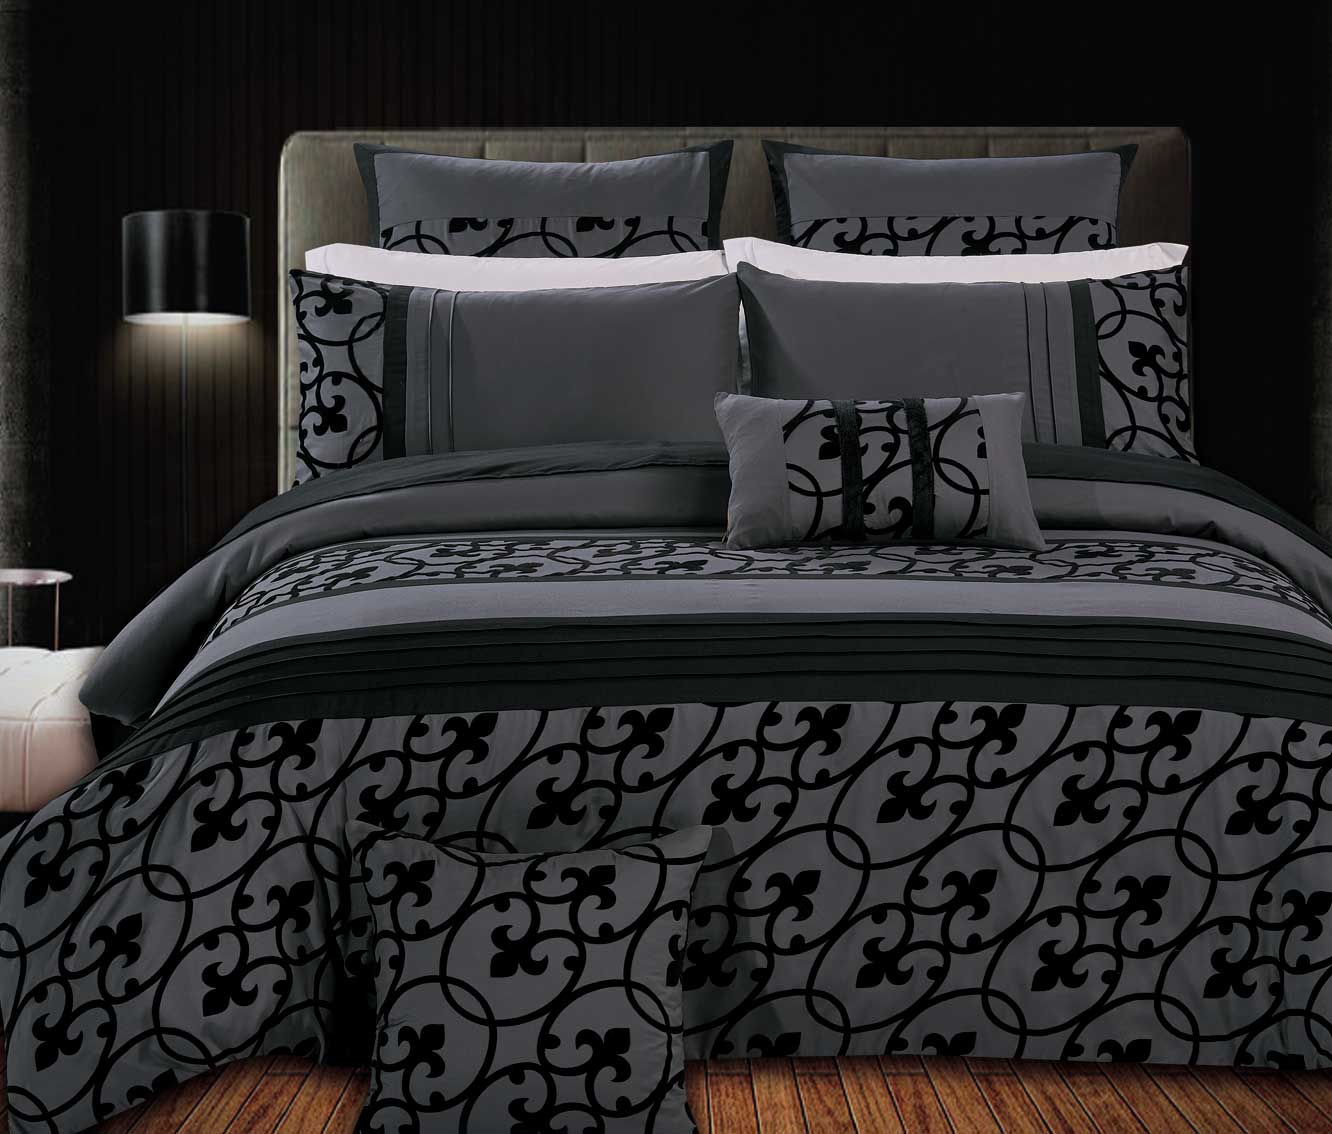 King Size 3pcs Scroll Floral Grey and Black Quilt Cover Set